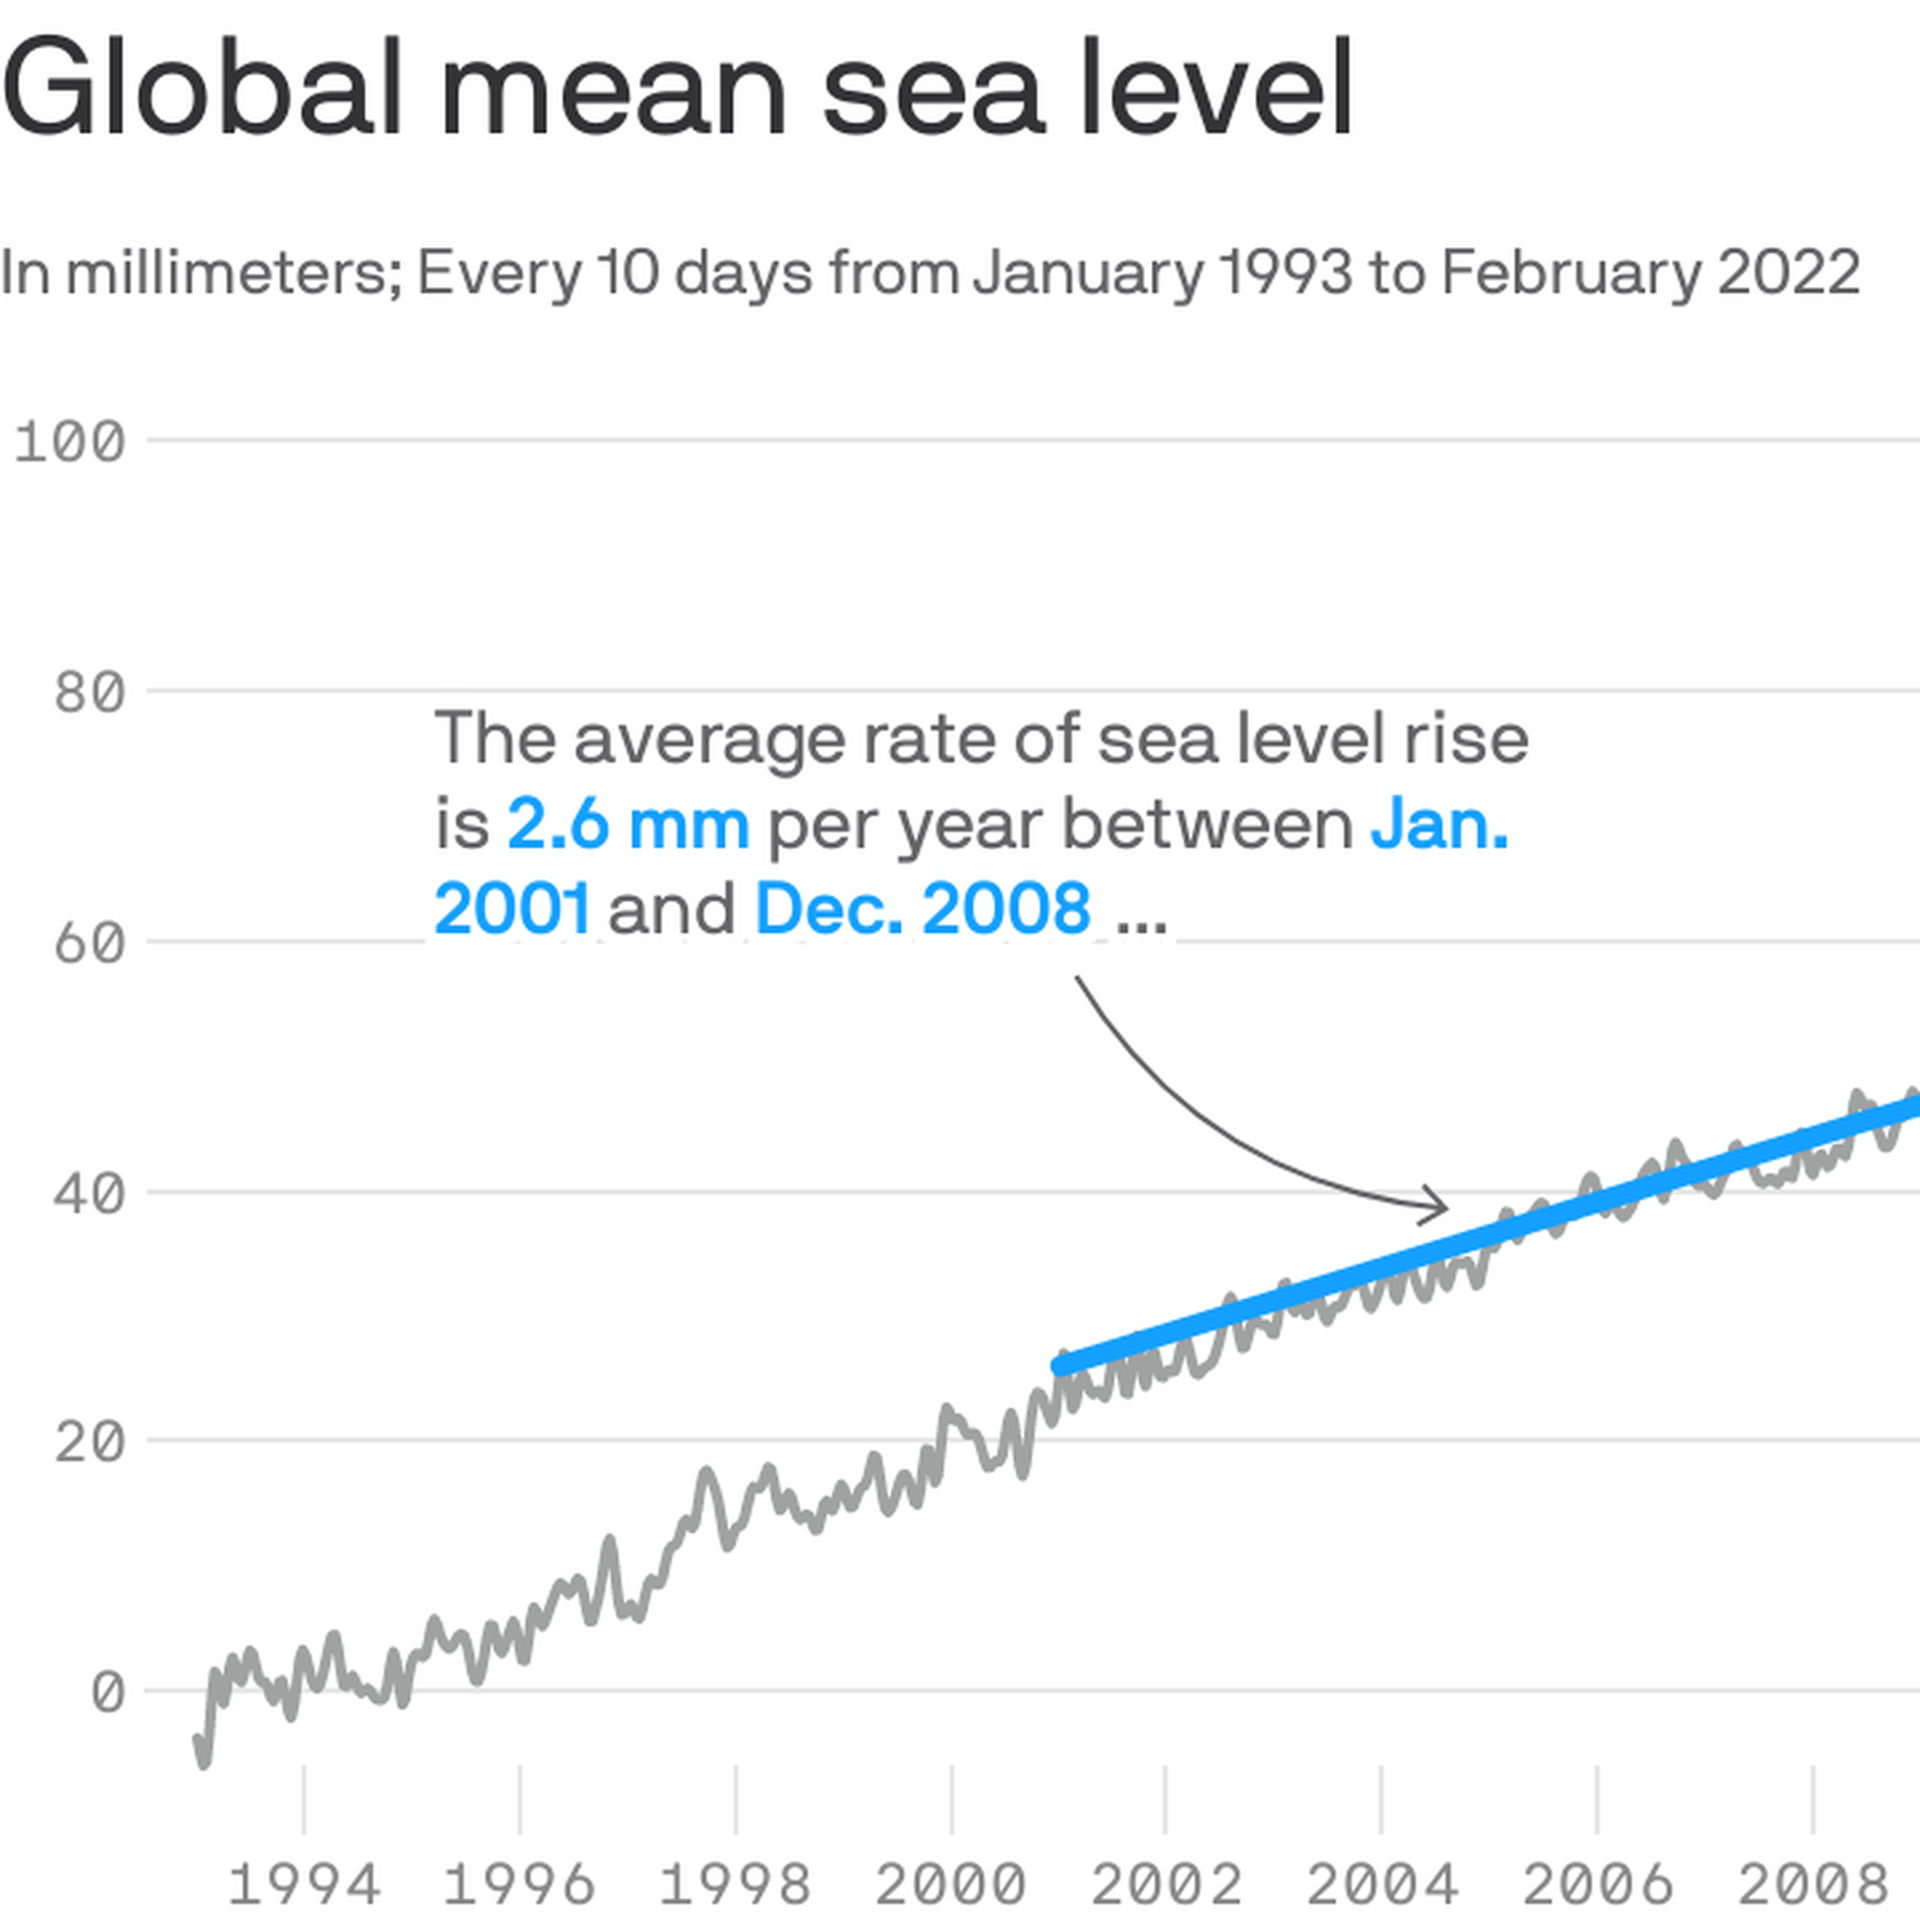 Graph shows sea level rise over time